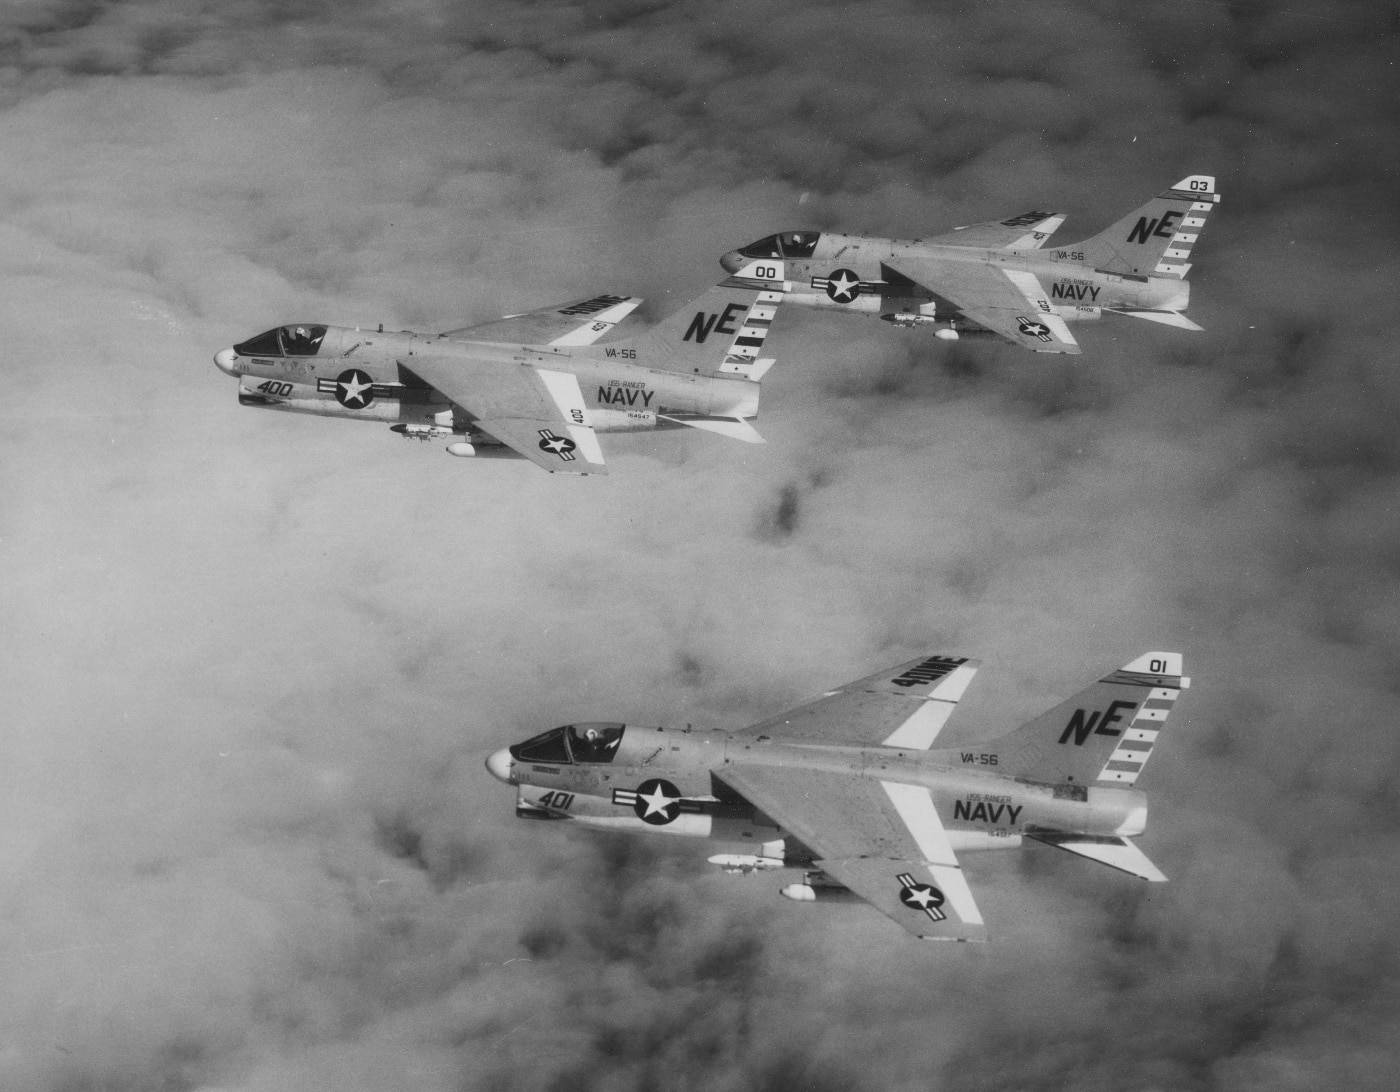 flight of three a-7b aircraft in formation